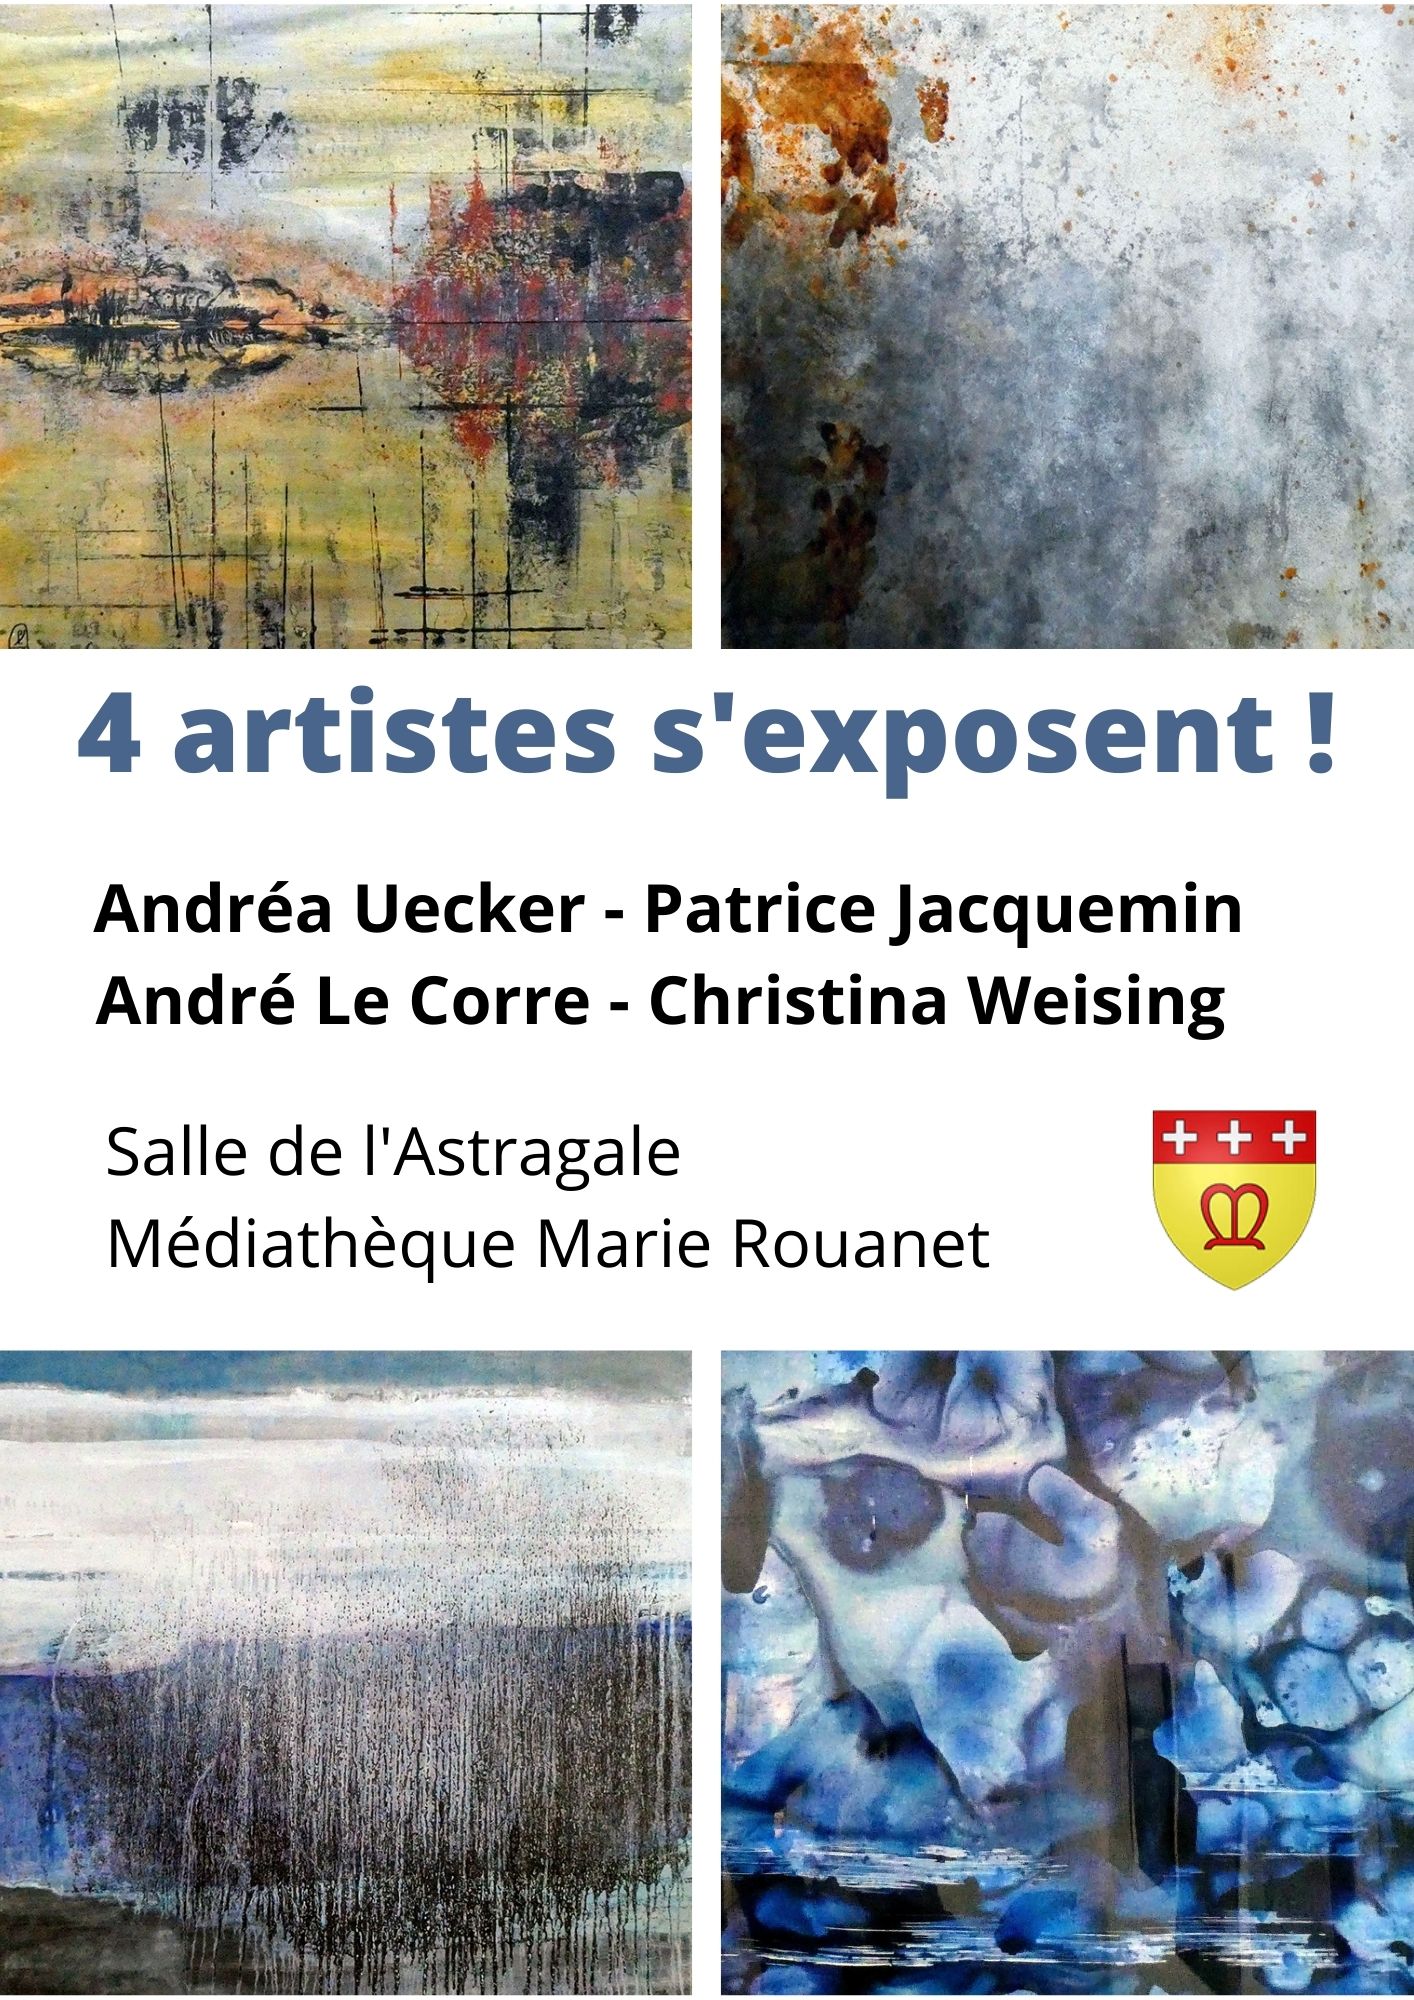 4 artistes s'exposent ! Andréa Uecker - Patrice Jacquemin - André Le Corre - Christina Weising